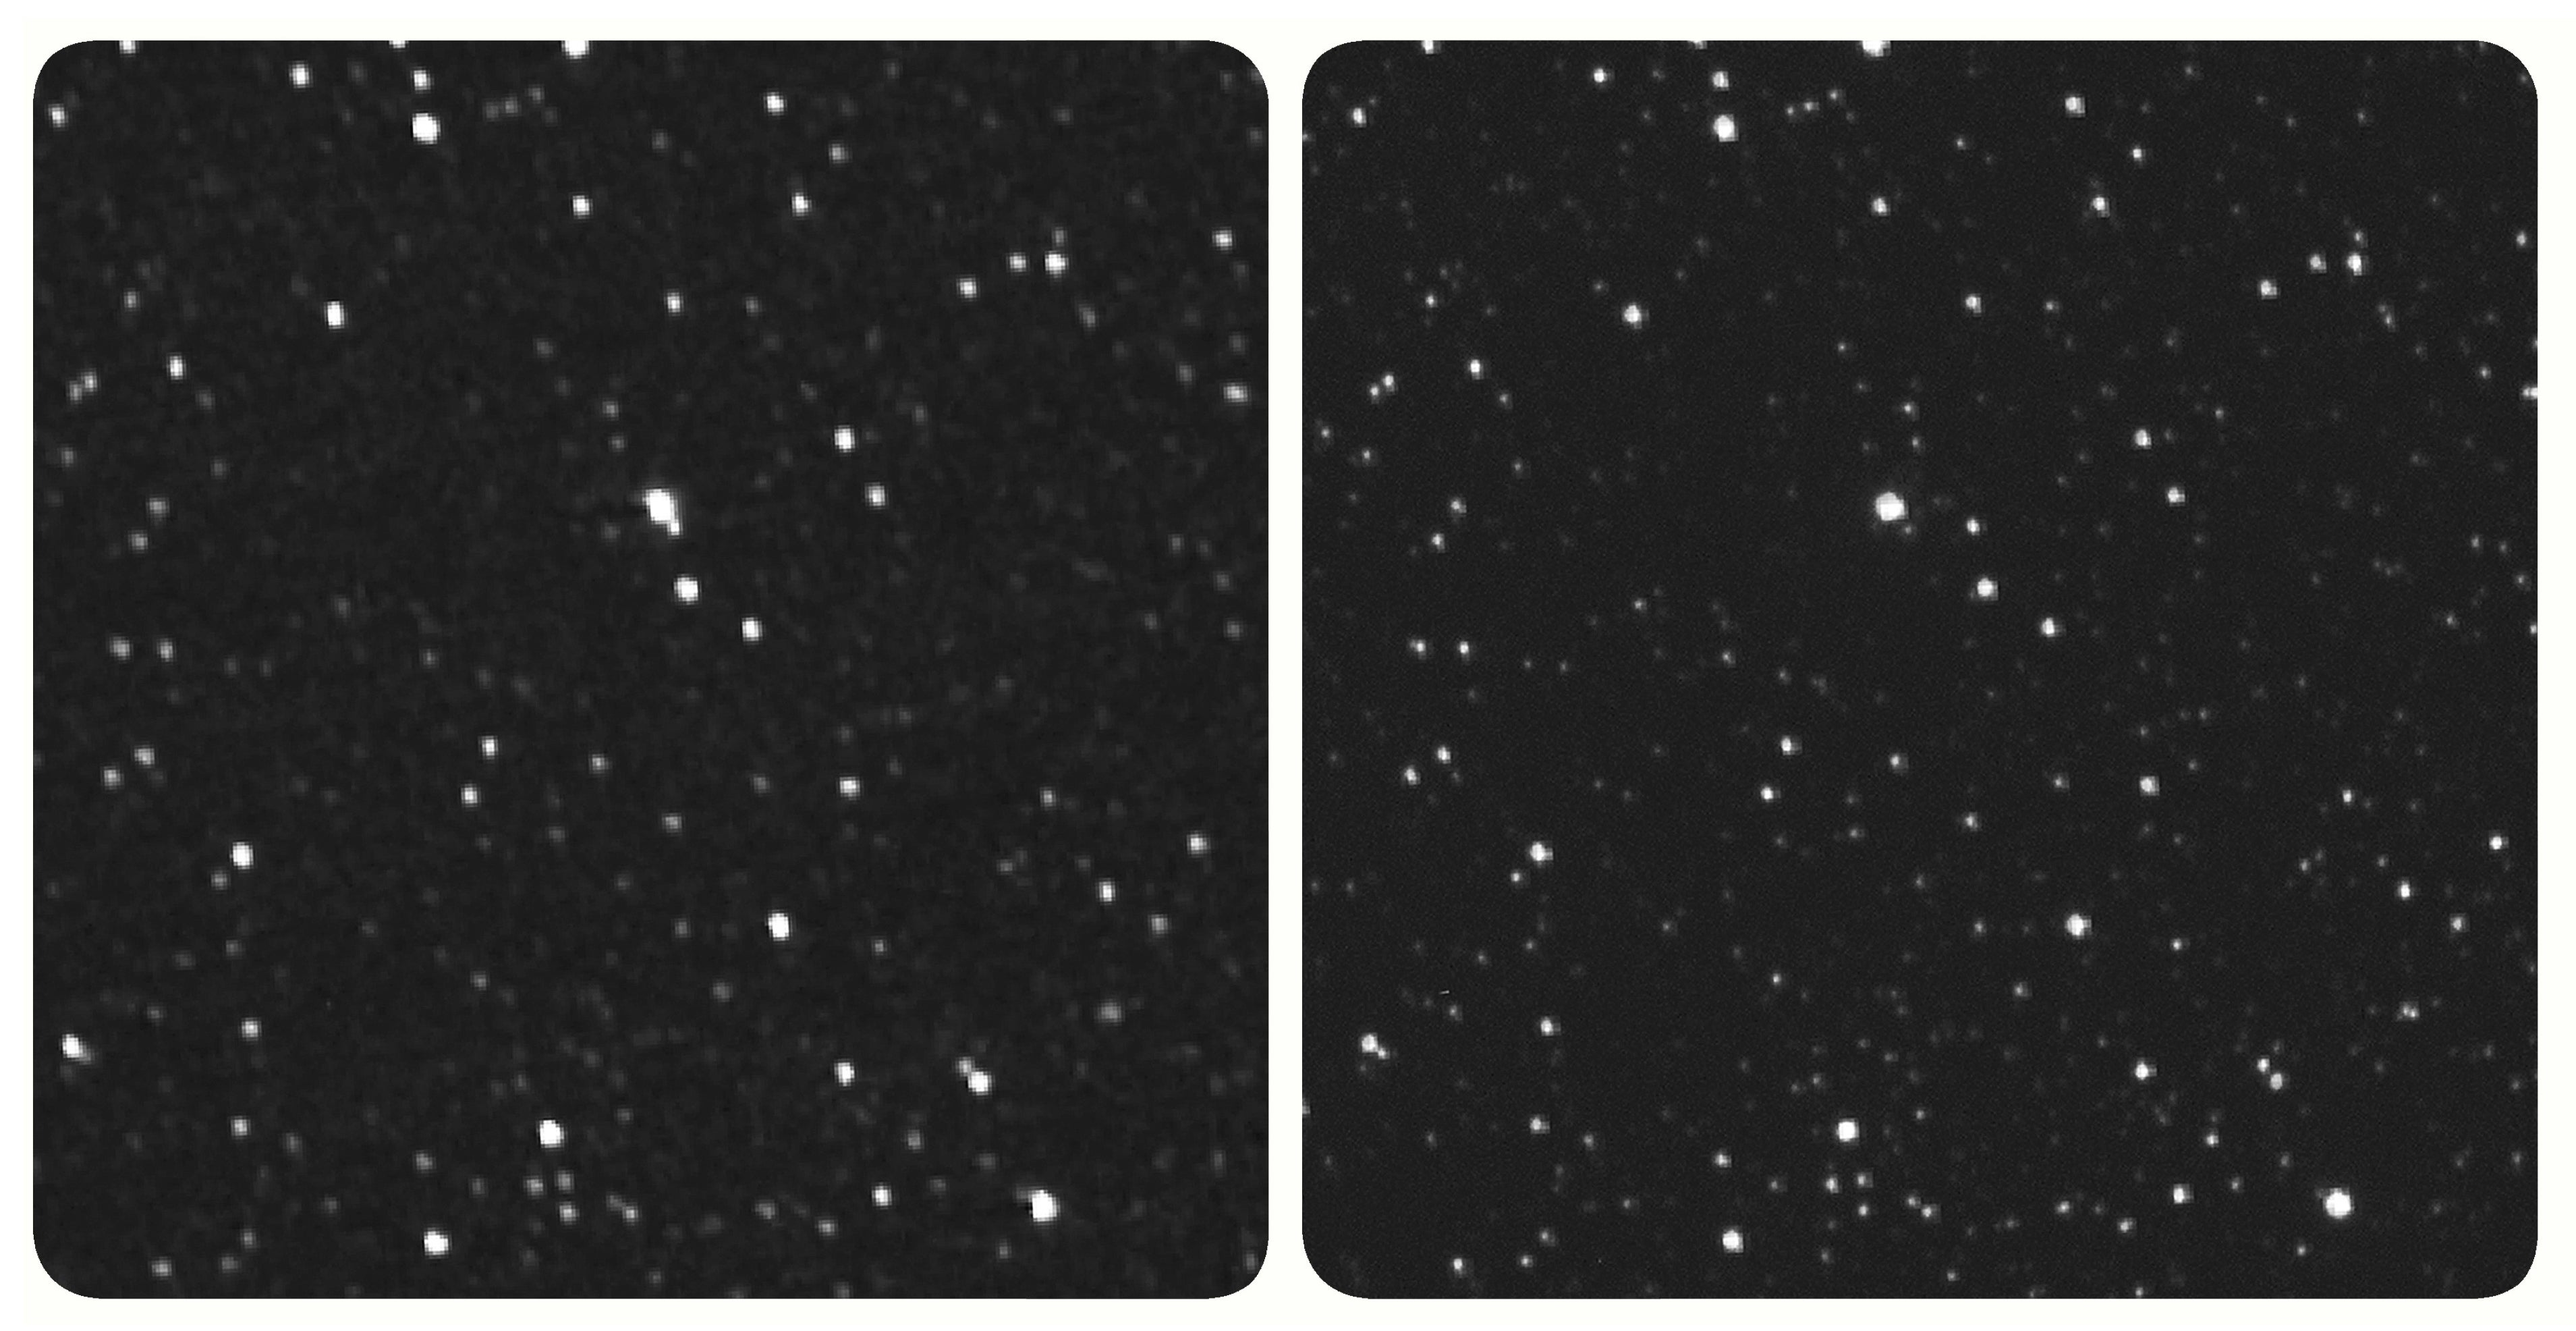 Two views of Proxima Centauri, the one on the left from New Horizons and the one on the right from Earth.  (Image: NASA)